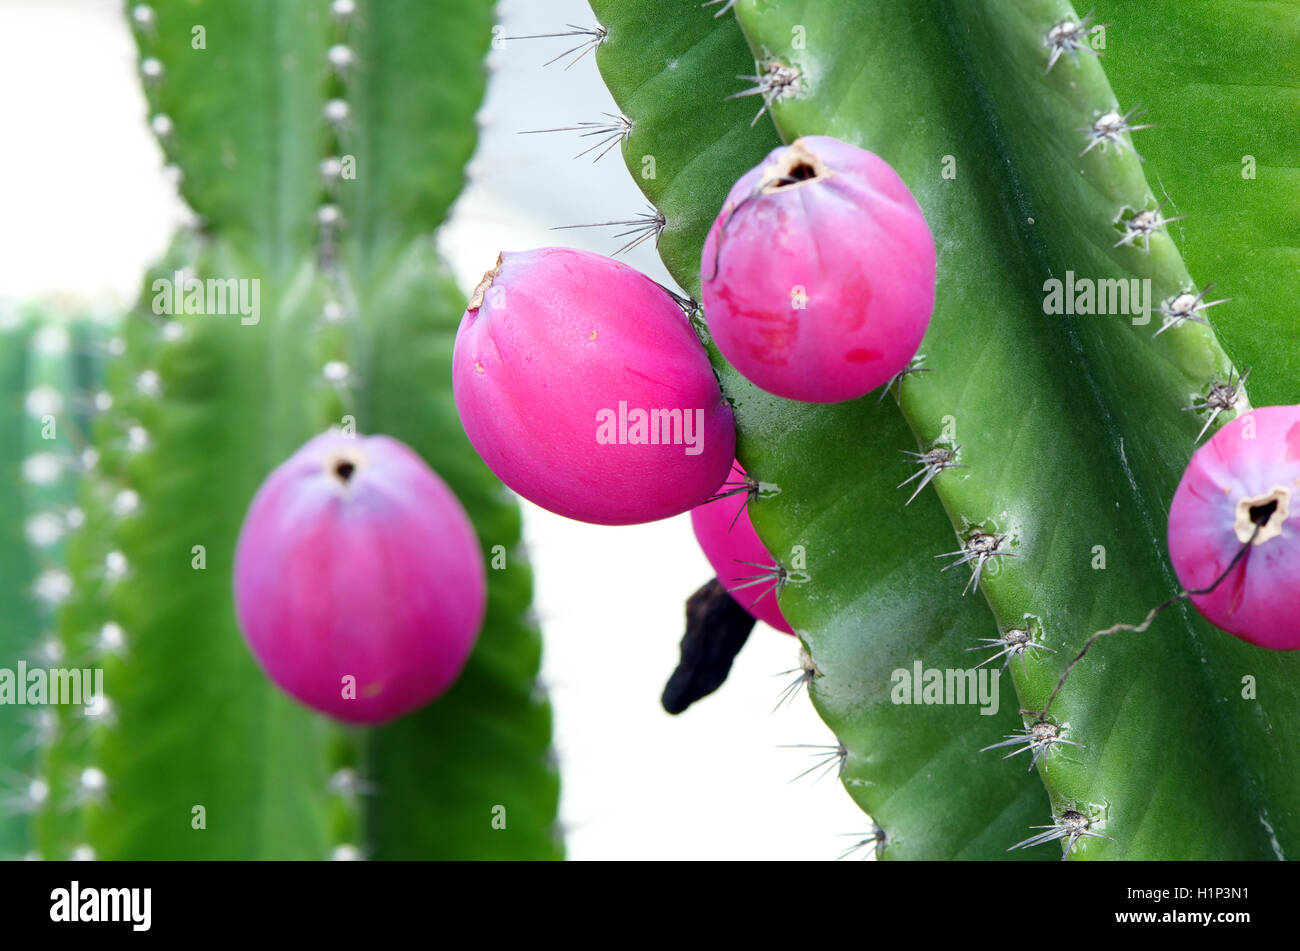 Groups of green cactus with fruit. Stock Photo